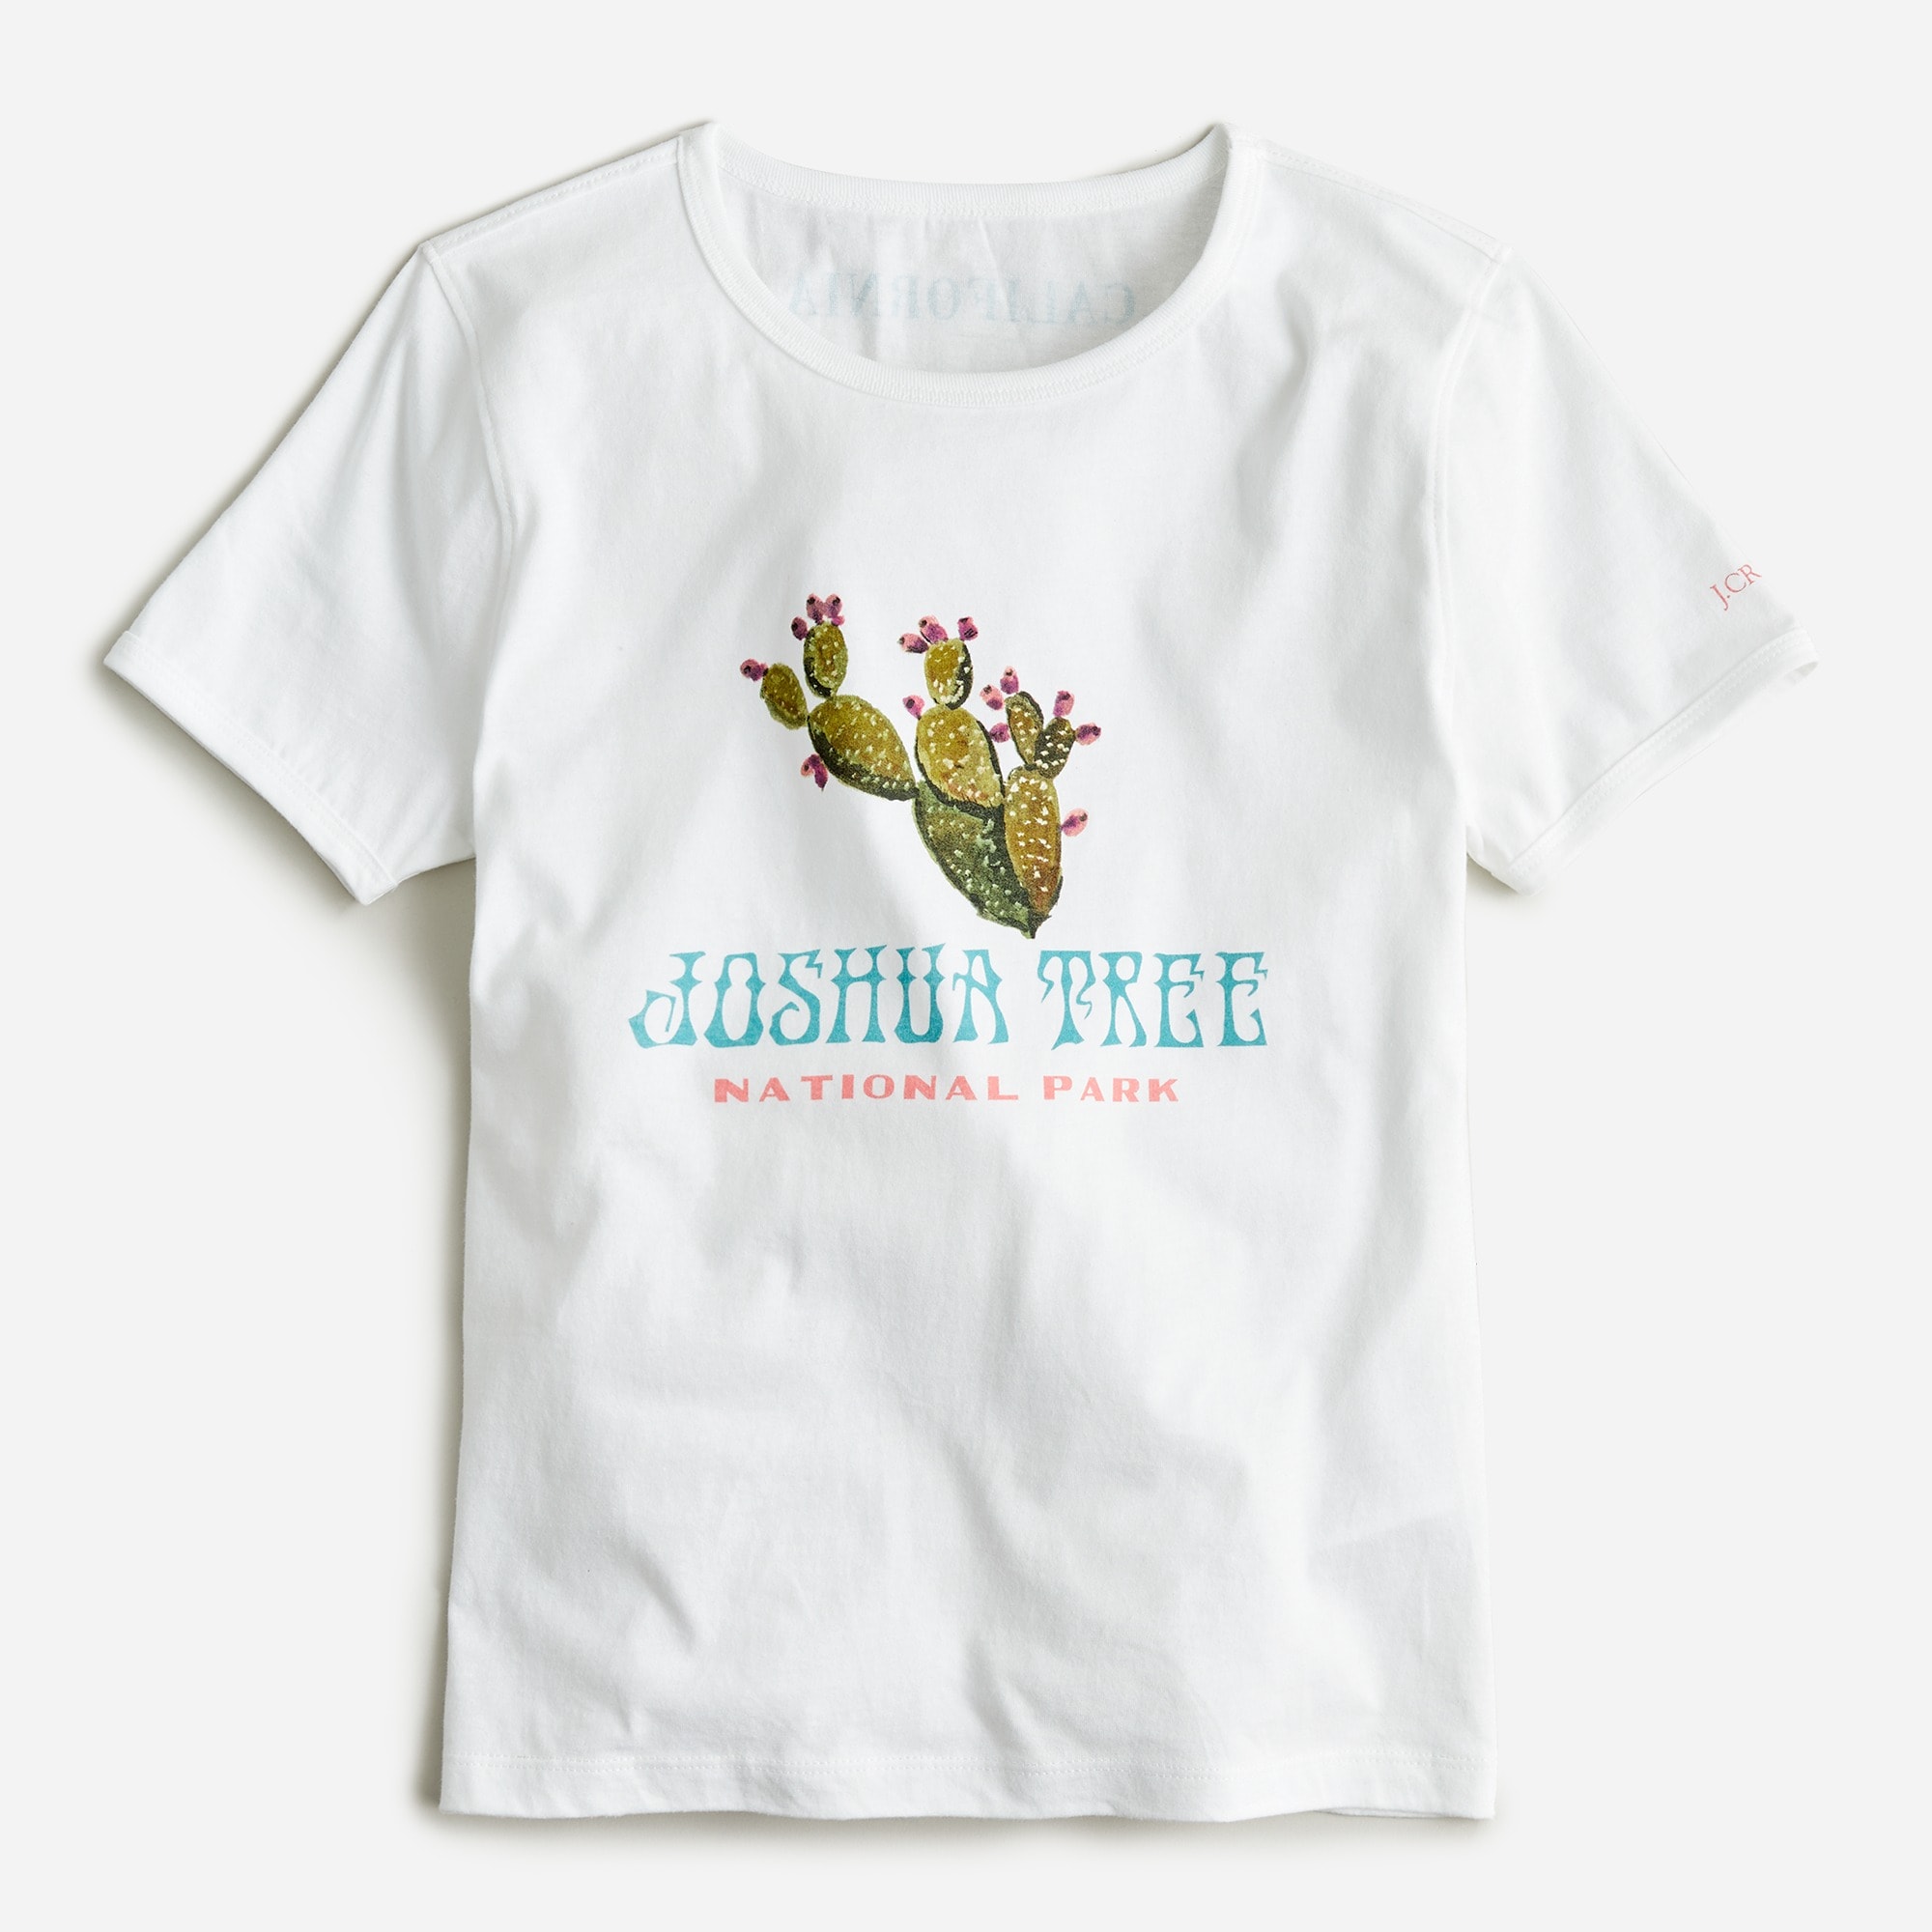 J.Crew: National Park Foundation X J.Crew Made-in-the-USA Women's Joshua  Tree T-shirt For Women